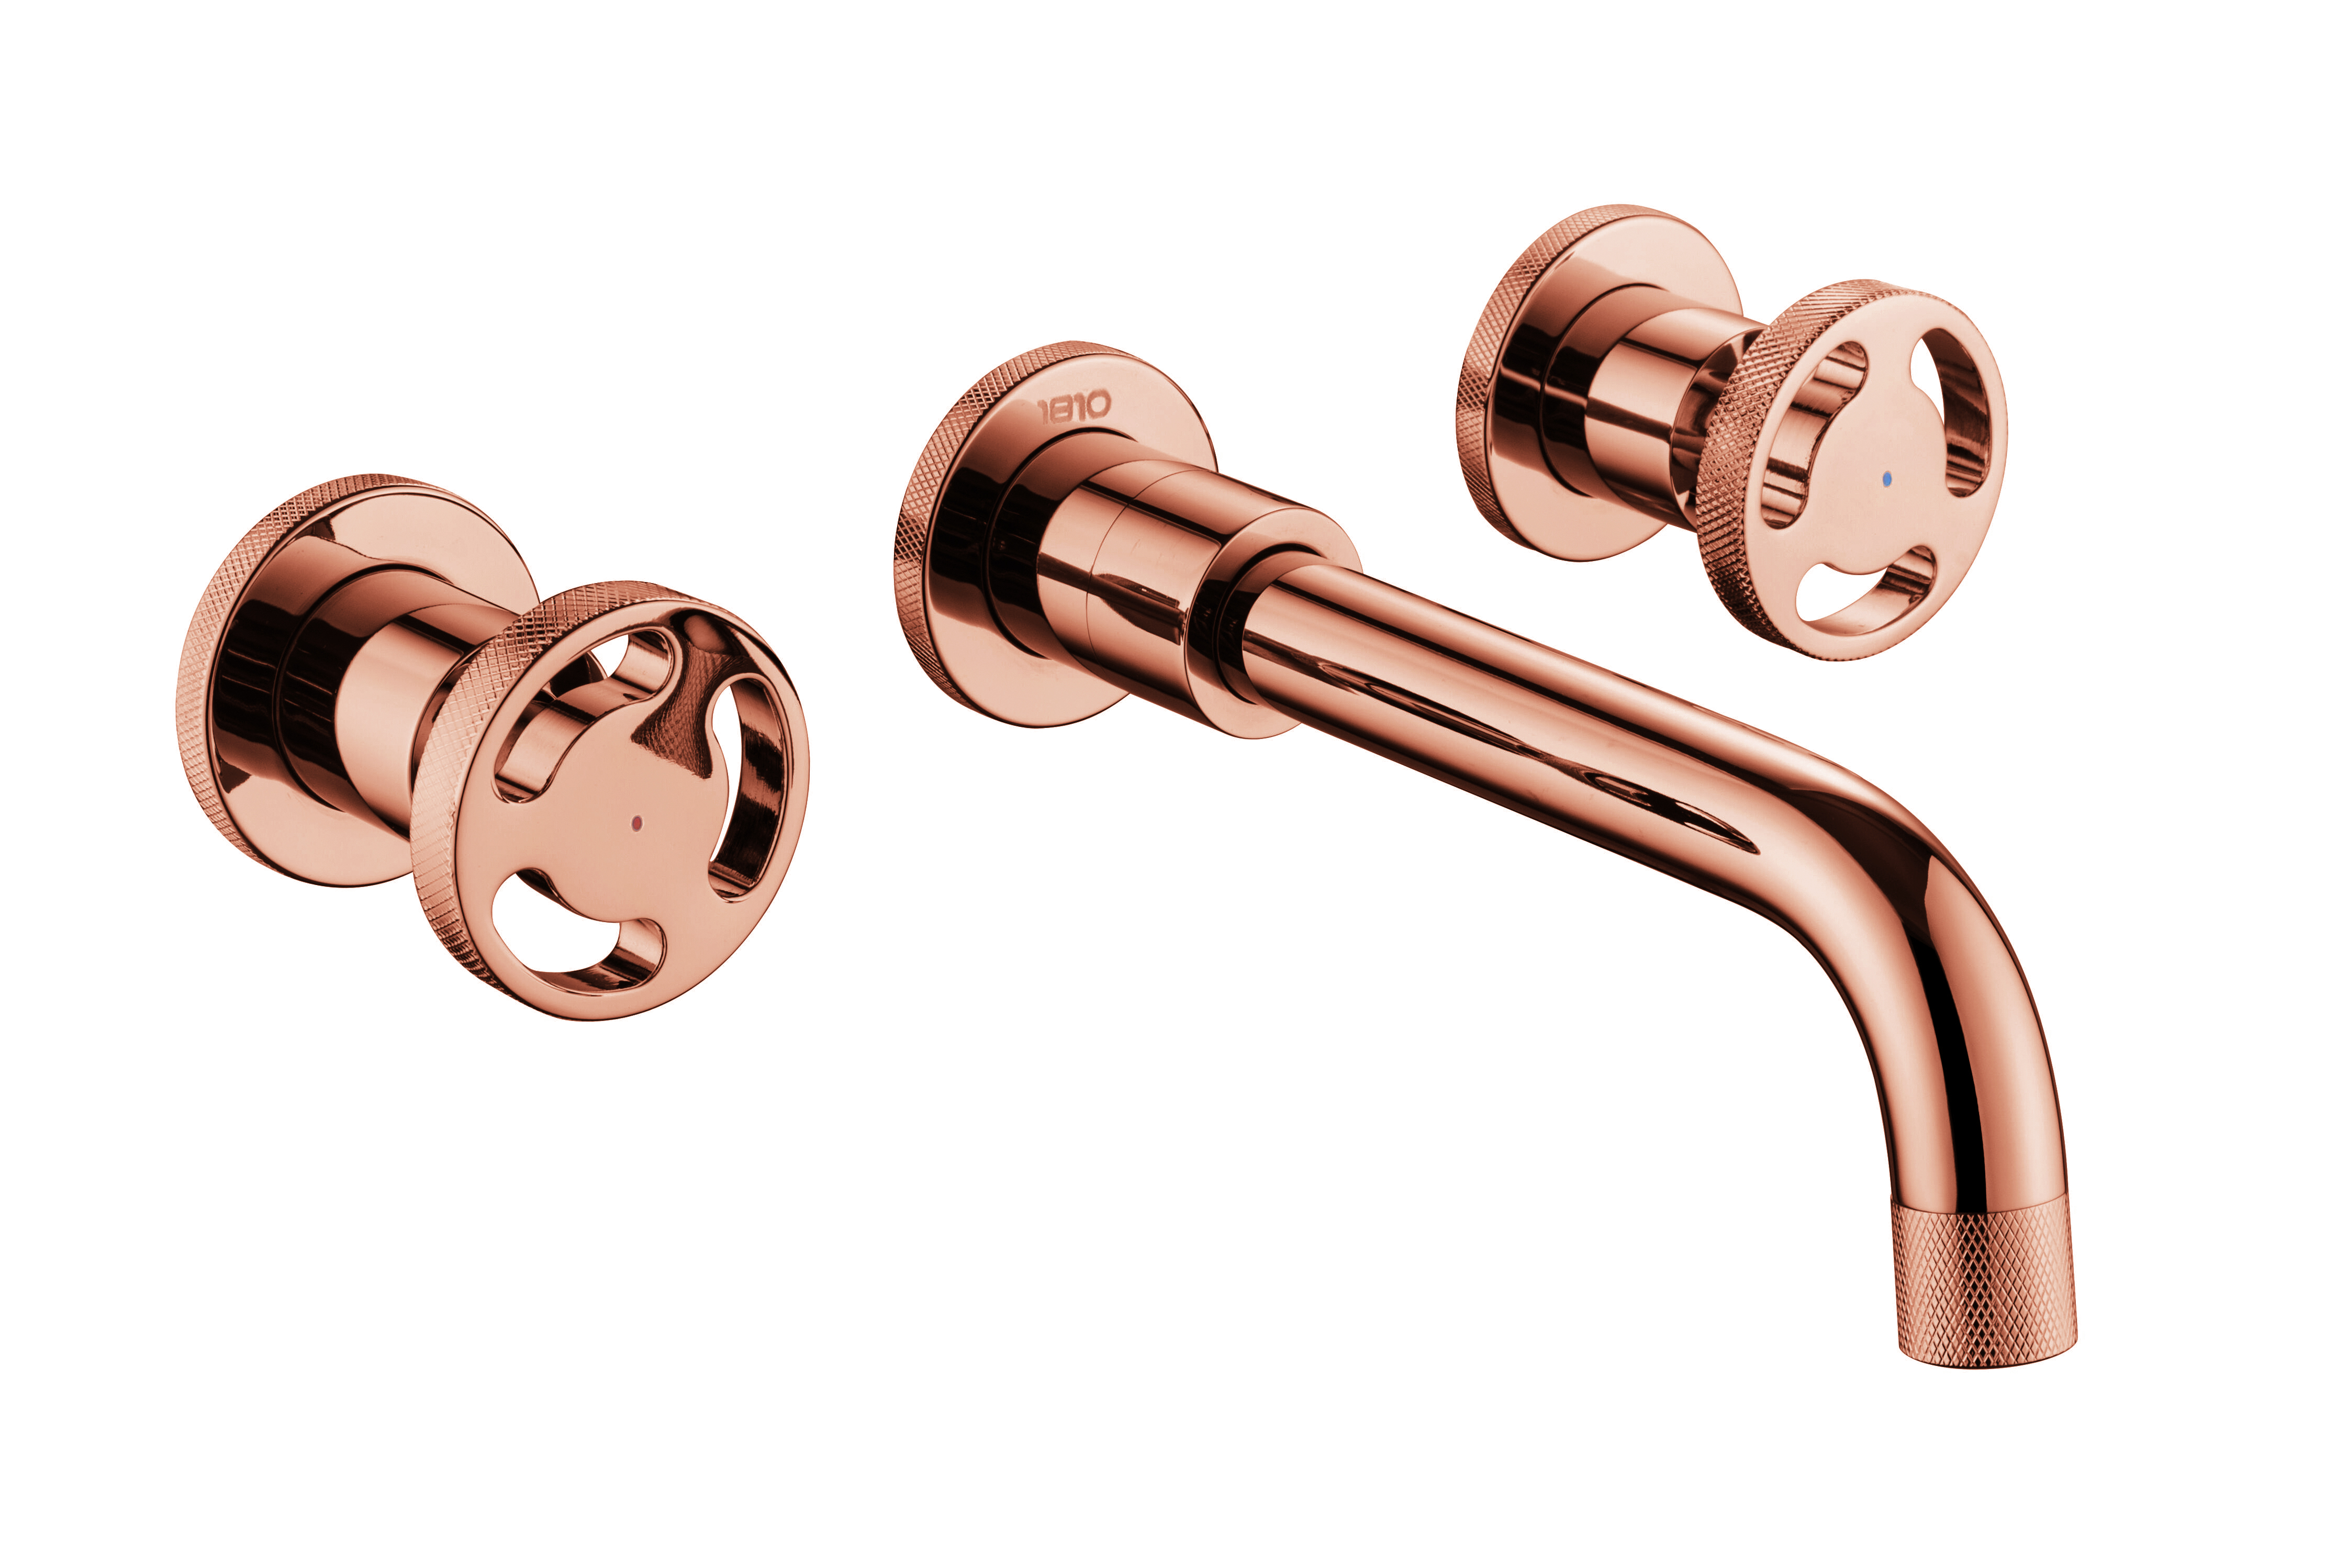 Copper Henry Holt Wall Mount Kitchen Taps